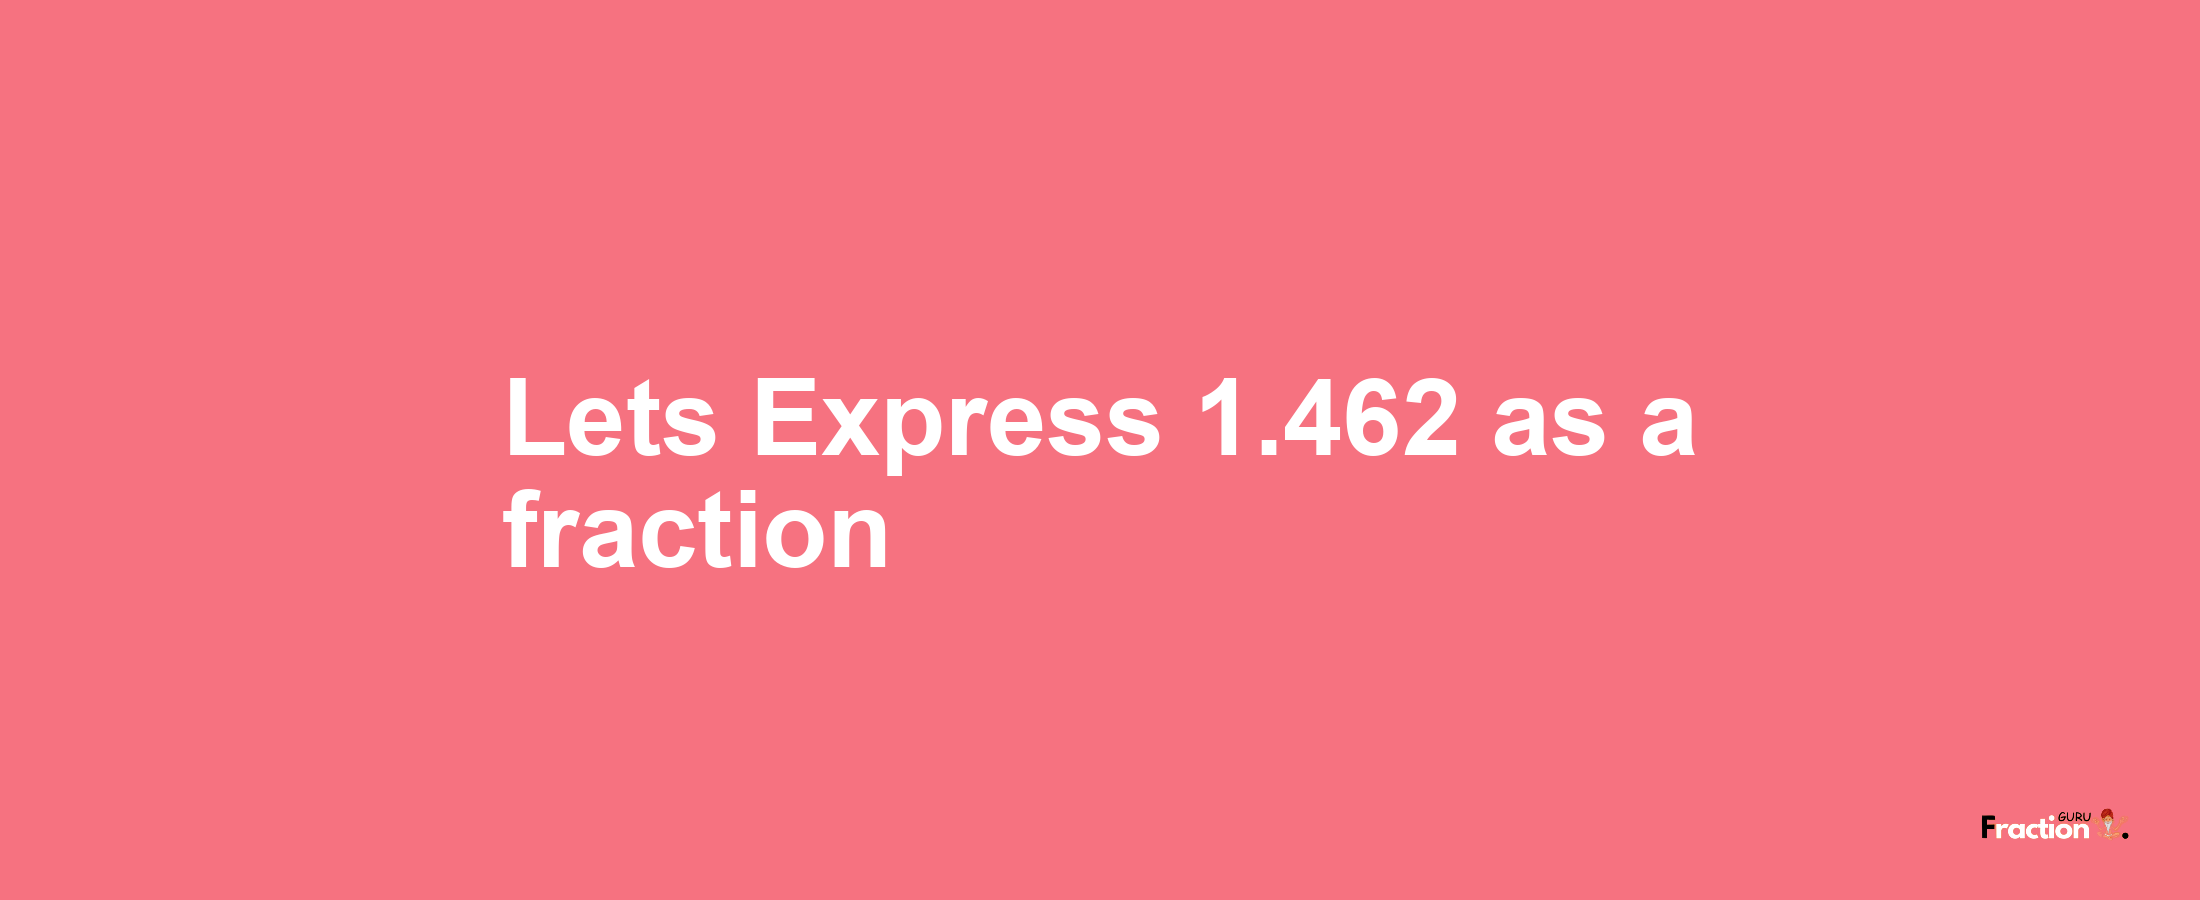 Lets Express 1.462 as afraction